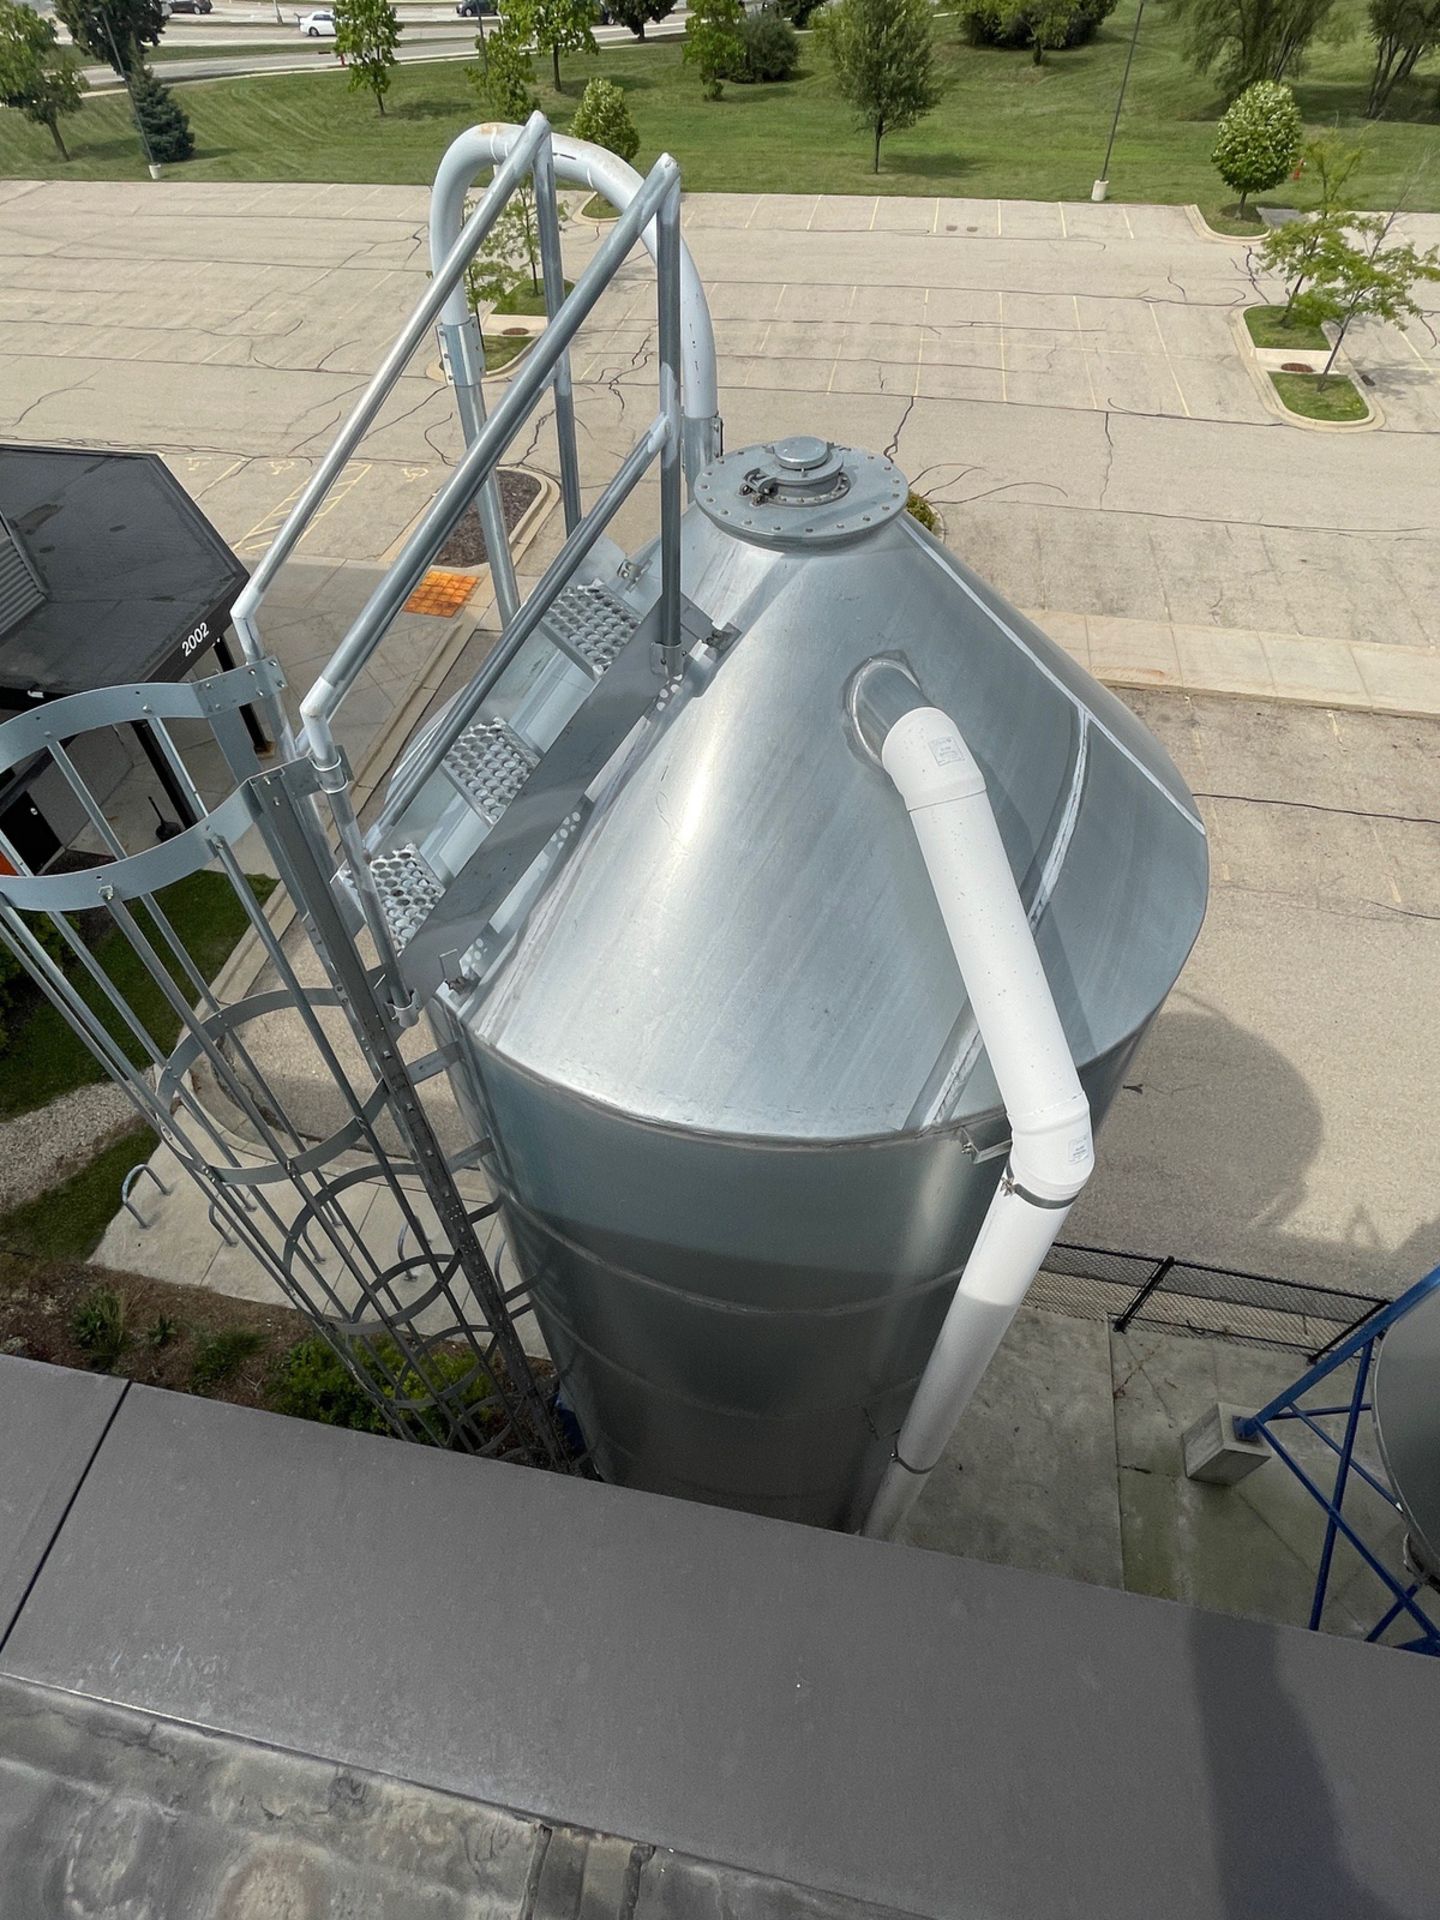 2013 Schuld/Bushnell 34.6 Ton Grain Silo, HP-60, 1730 Cubic ft, 10' x 18' Tank, S/N | Rig Fee $3500 - Image 12 of 12